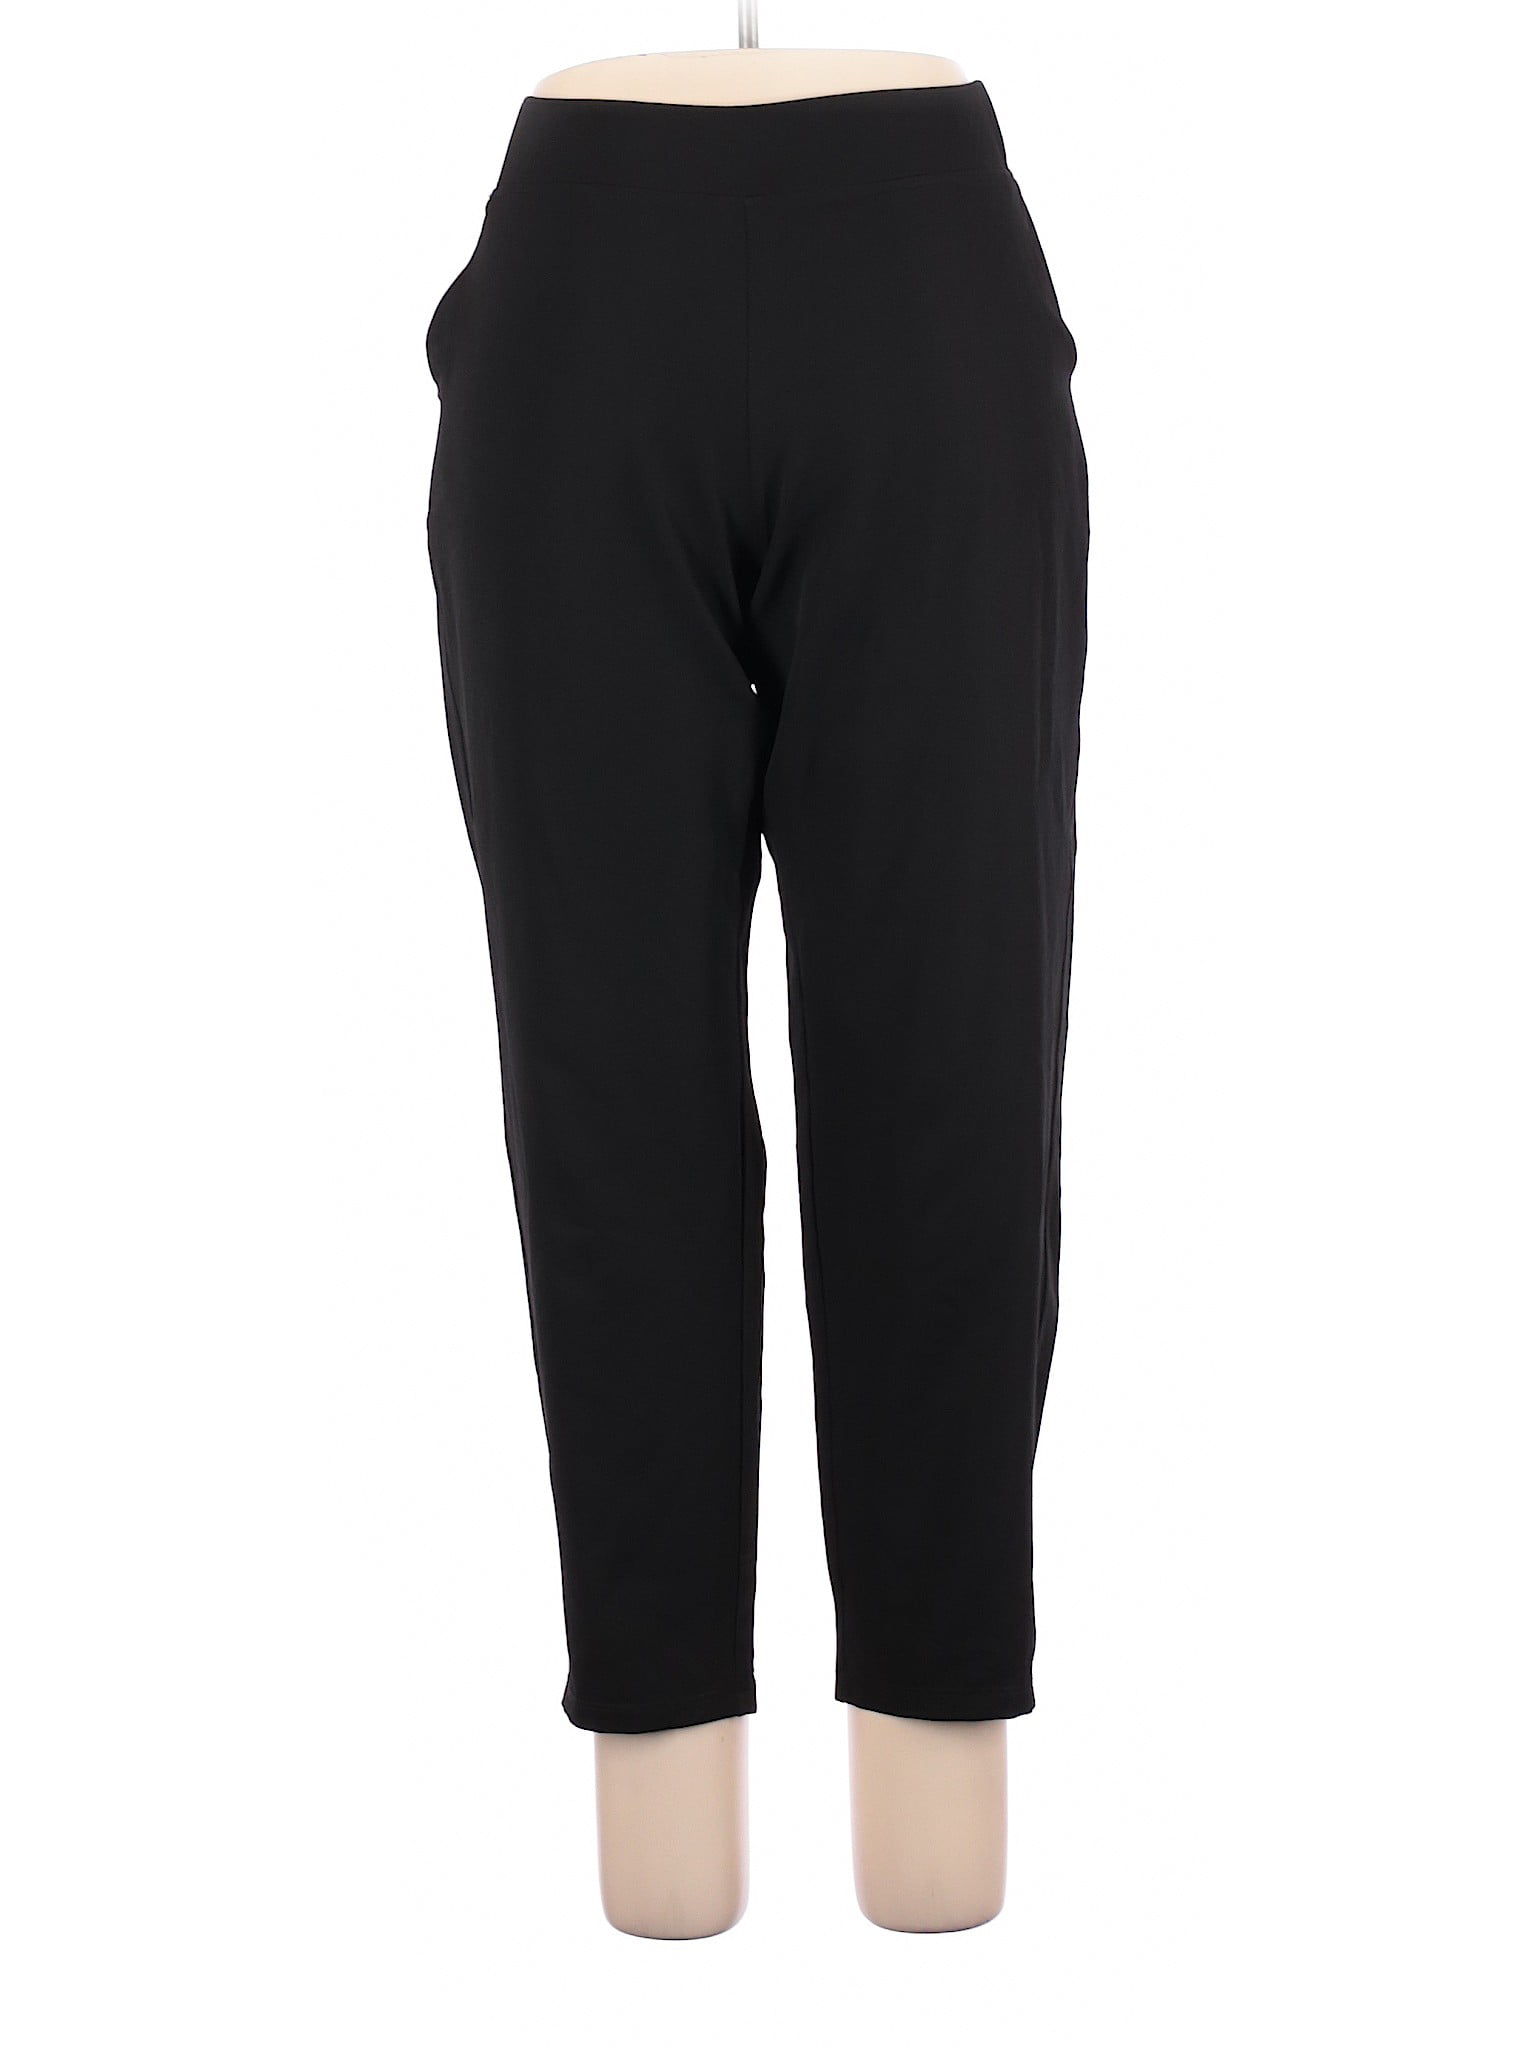 32 Degrees - Pre-Owned 32 Degrees Women's Size L Active Pants - Walmart ...